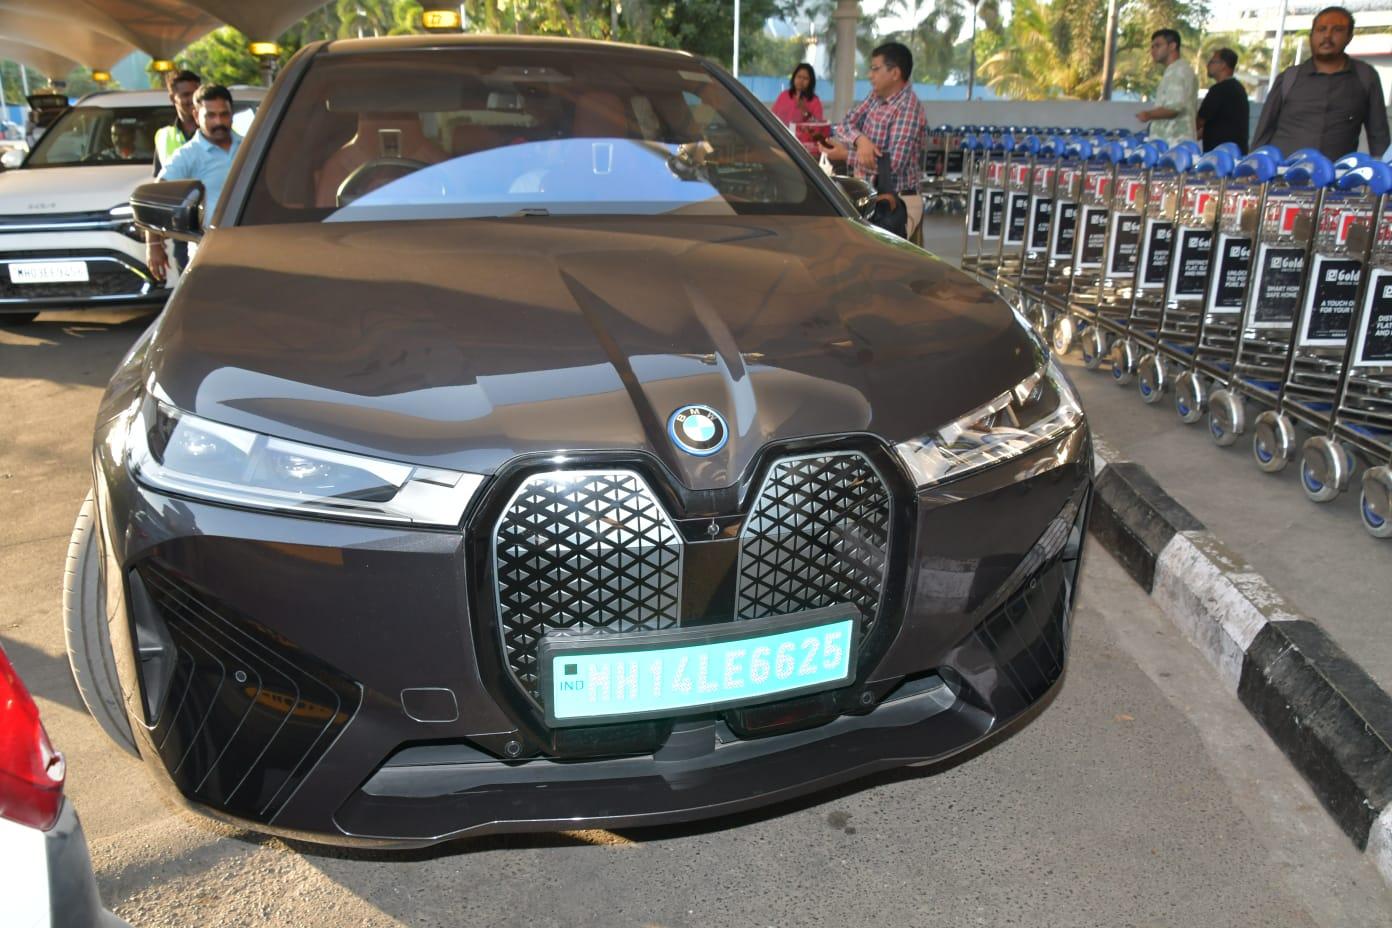 Ibrahim Ali Khan and Amrita arrived at the Mumbai airport in their swanky new BMW car